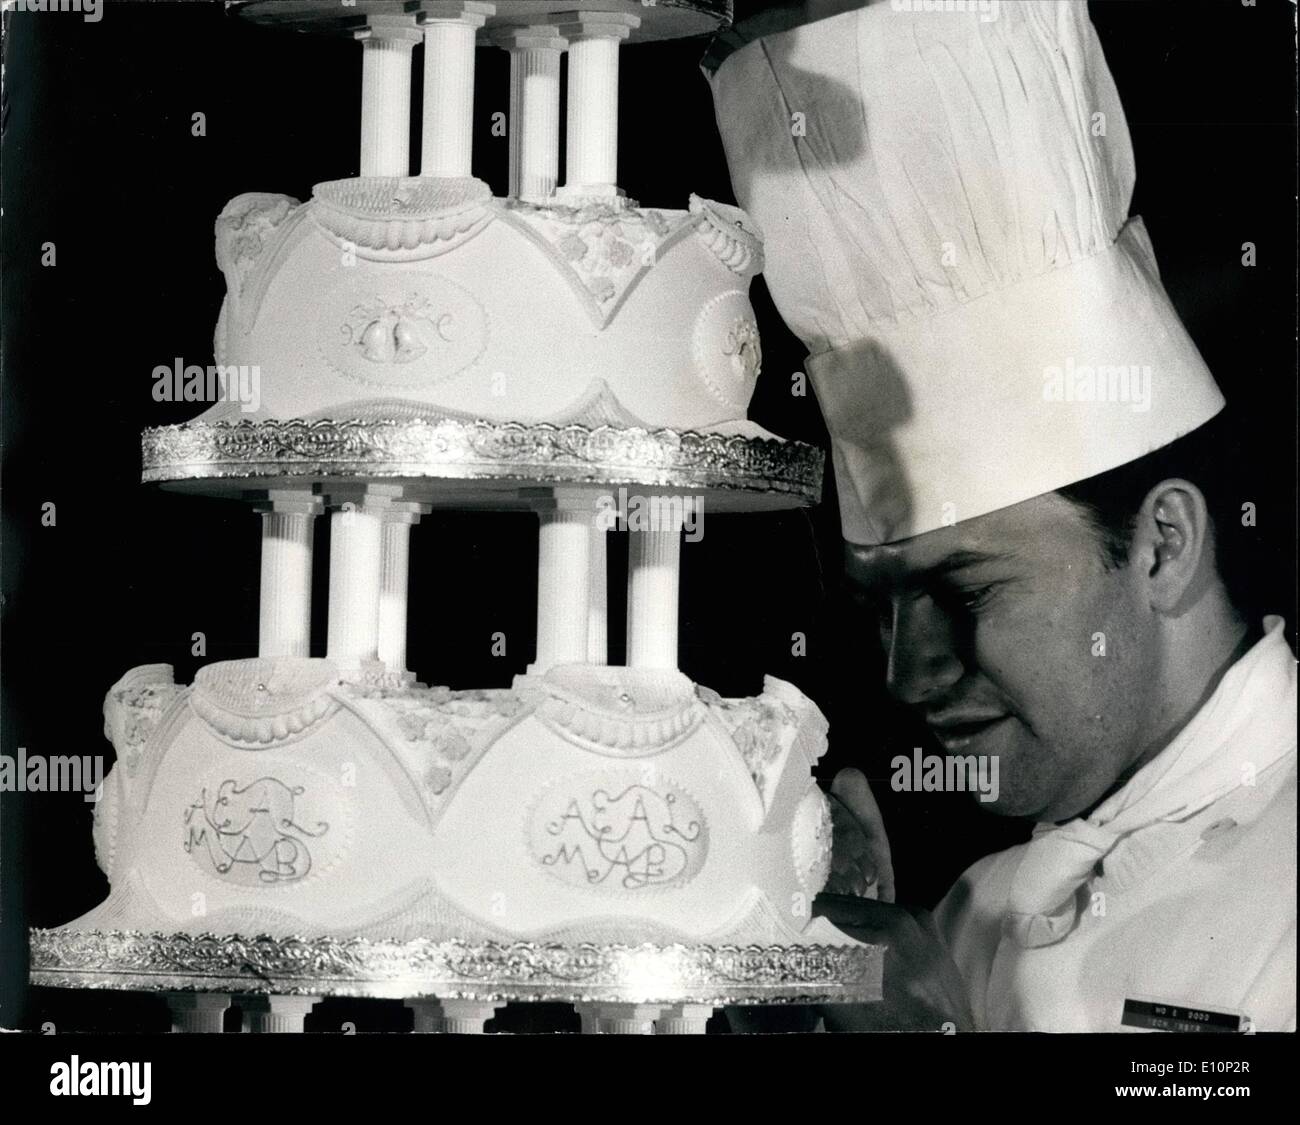 Nov. 09, 1973 - November 9th 1973 The Army catering corps at Aldershot make Princess Anne's wedding cake. The Army Catering Corps at Aldershto have made the official cake for the wedding of Princess Anne to Captain Mark Phillips next Wednesday. The honour of designing and making the cake was vested in Warrant Officer David Dodd, who is instructor at the Army School of Catering at Aldershot. It is a 5-tier cake, standing 5-foot, 8 inches high, has a 22-inch diameter base and weighs approximately 145 lbs Stock Photo